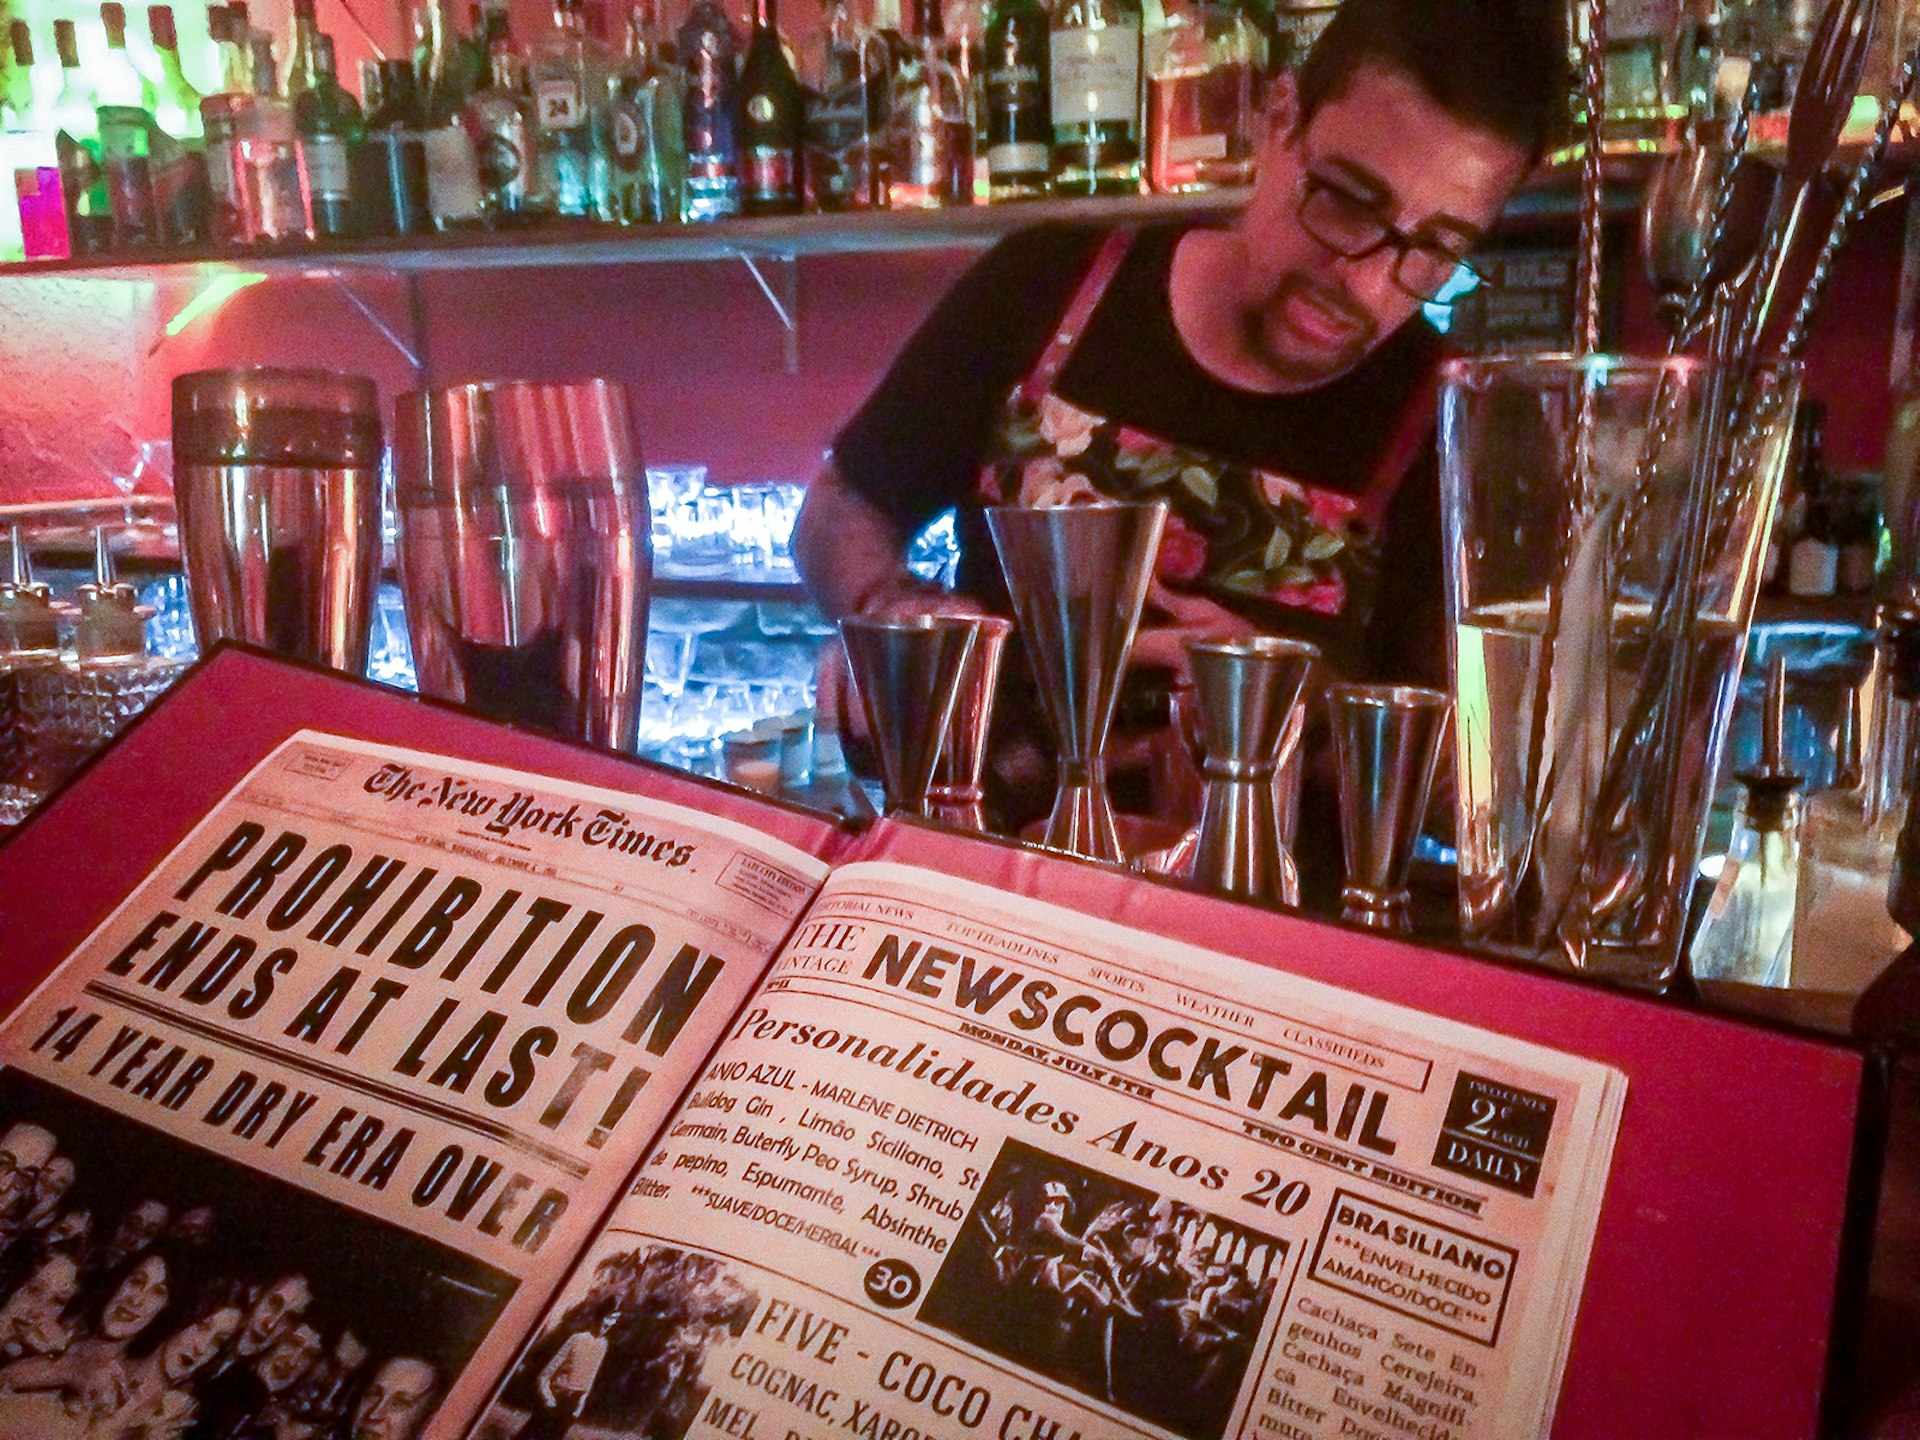 A book with images of Prohibition-era newspapers sit in the foreground as a man with glasses mixes a cocktail in the background